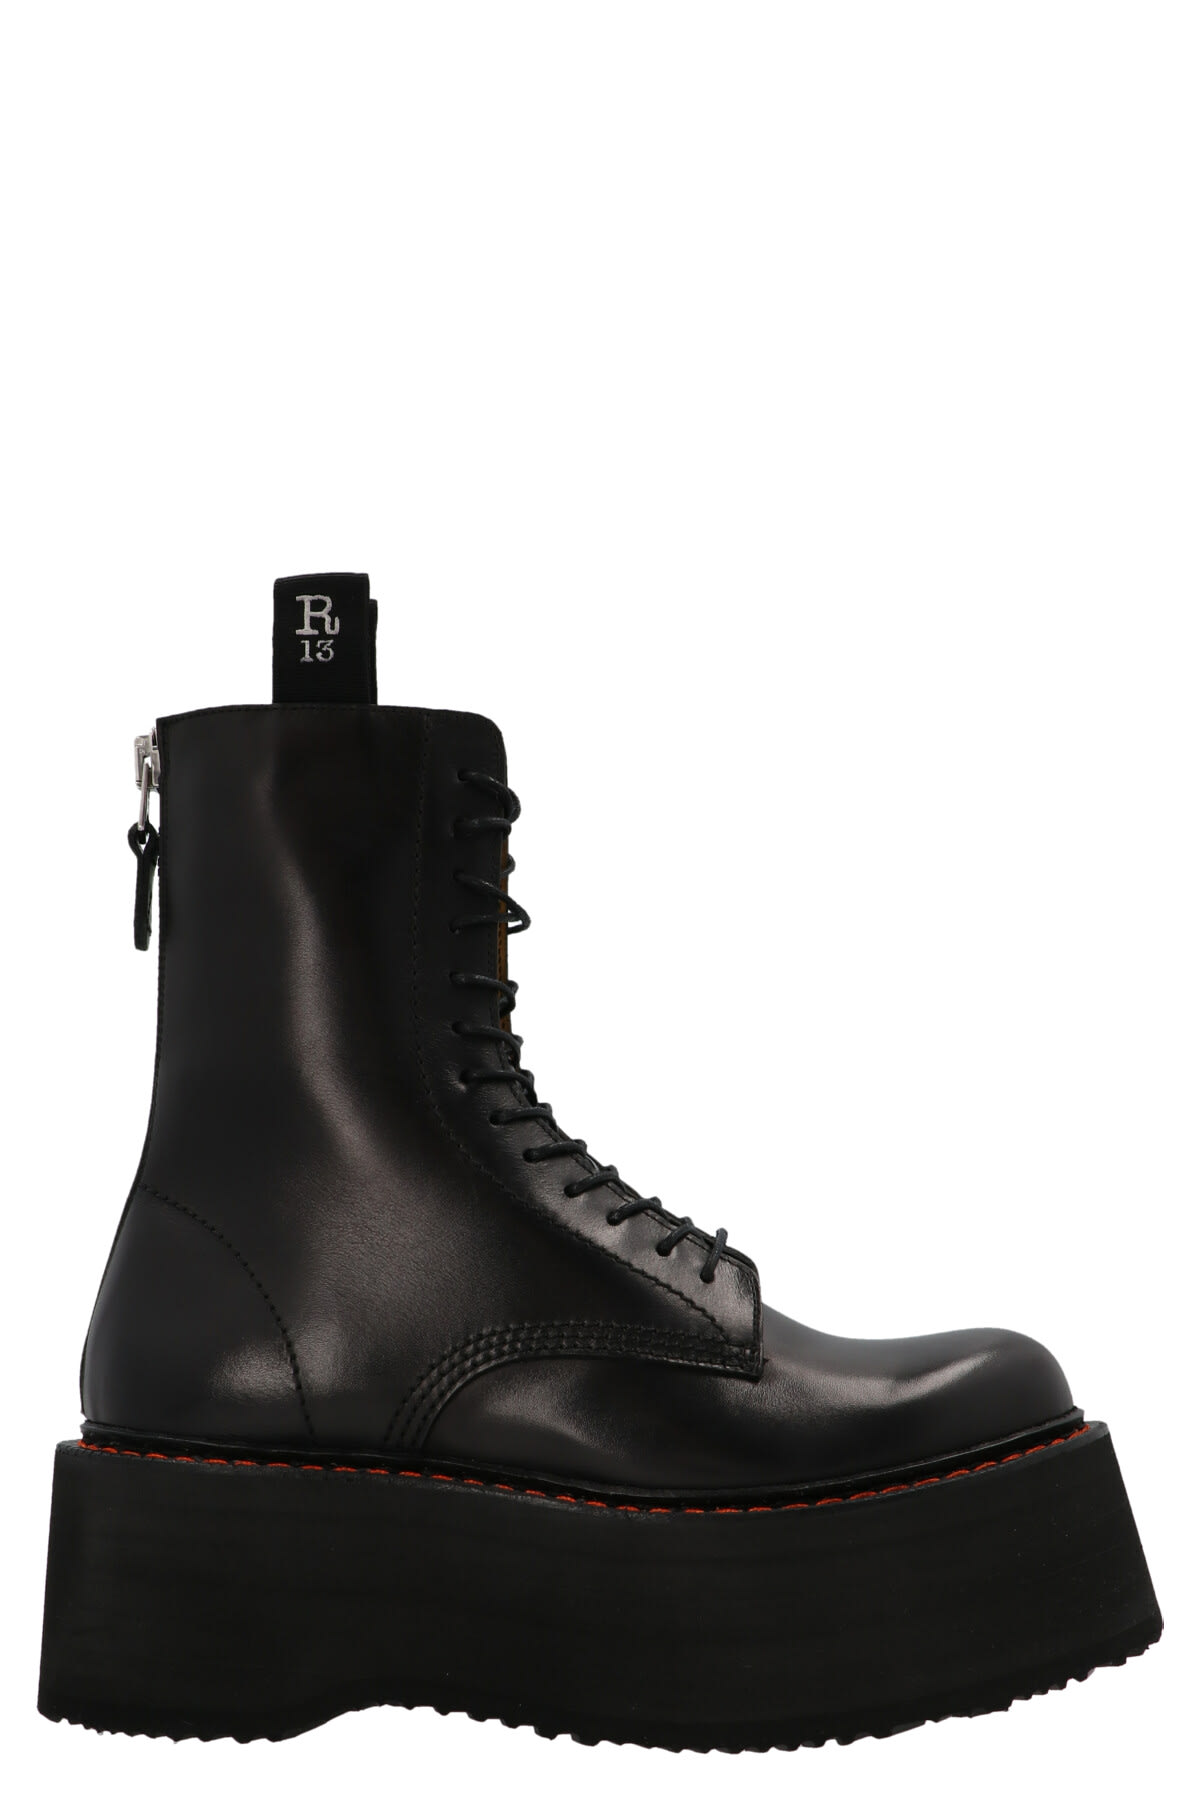 R13 x-stack Combat Boots